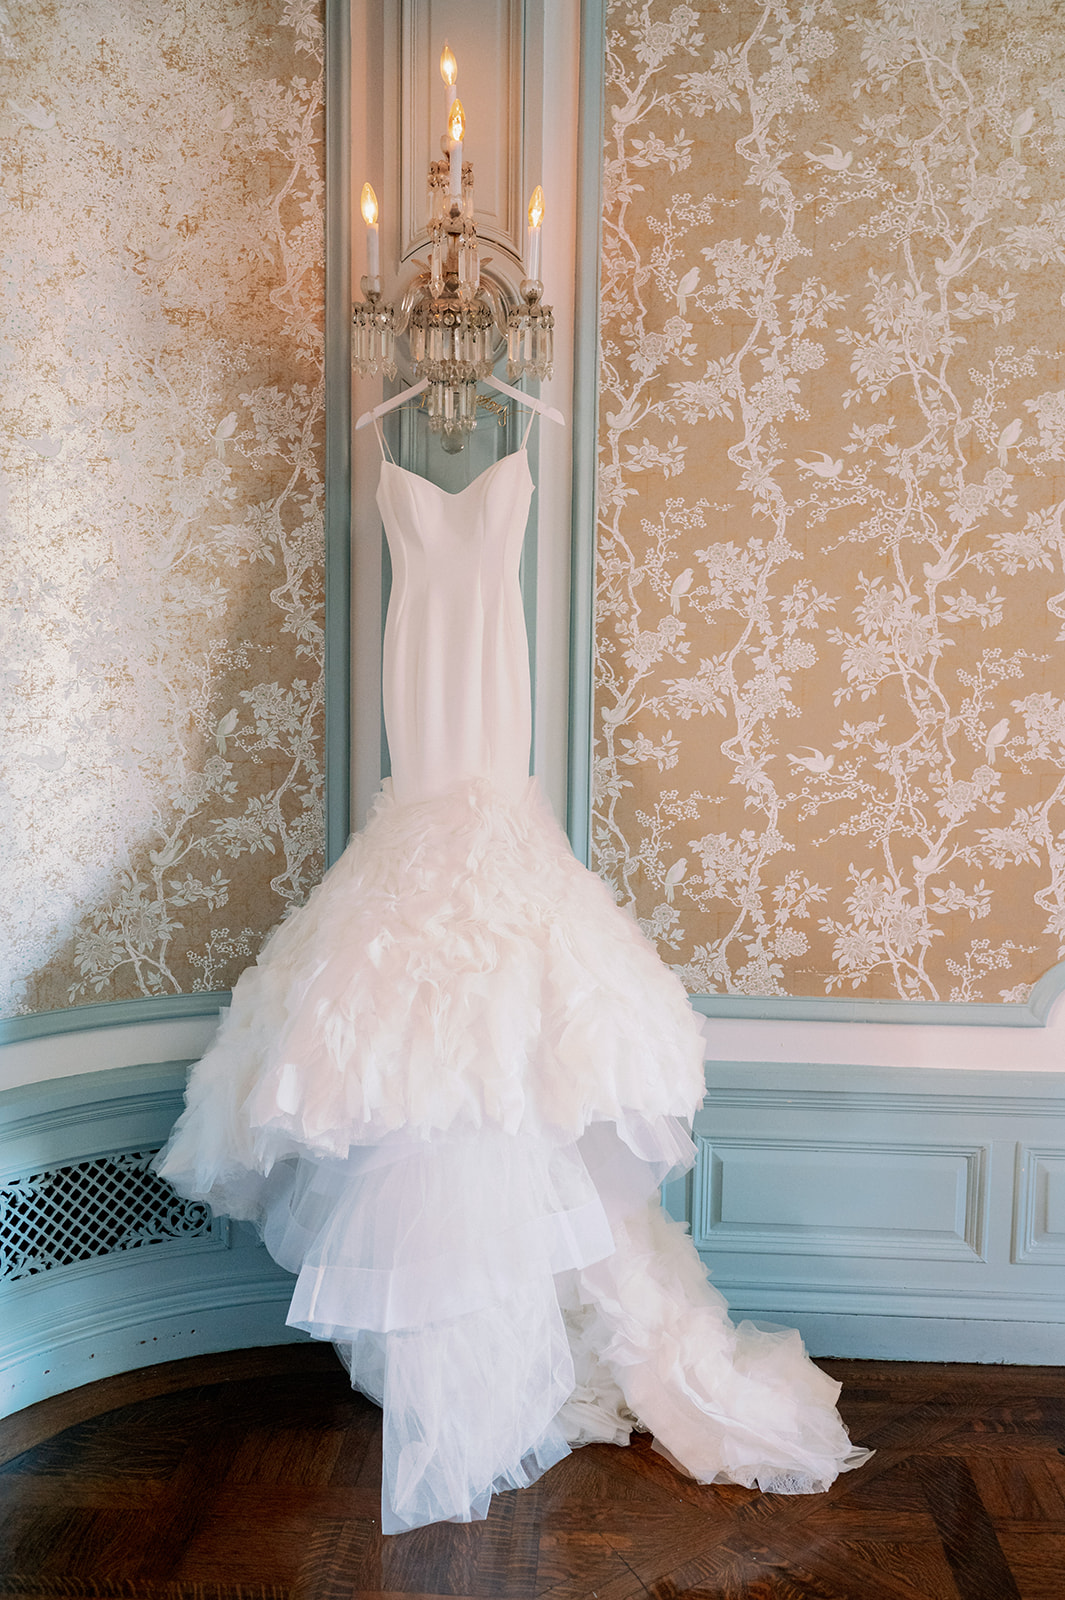 Mermaid wedding dress hanging on a wall sconce at the Bourne Mansion.